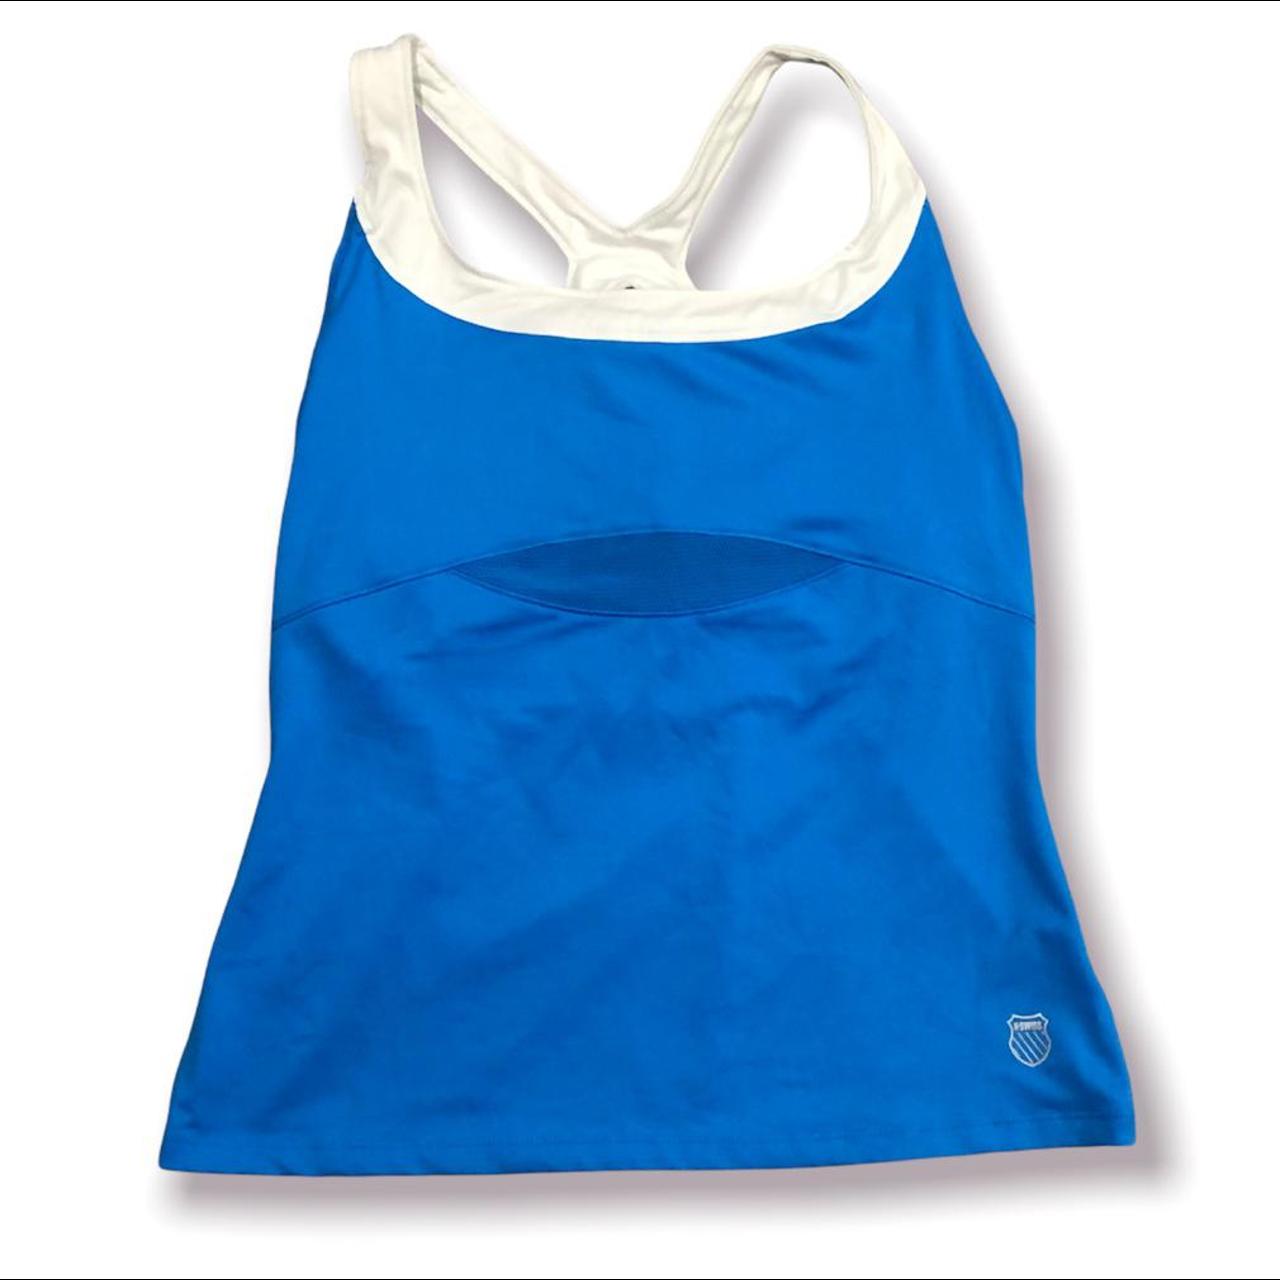 Product Image 1 - K-Swiss Blue Tank Top

Good Condition